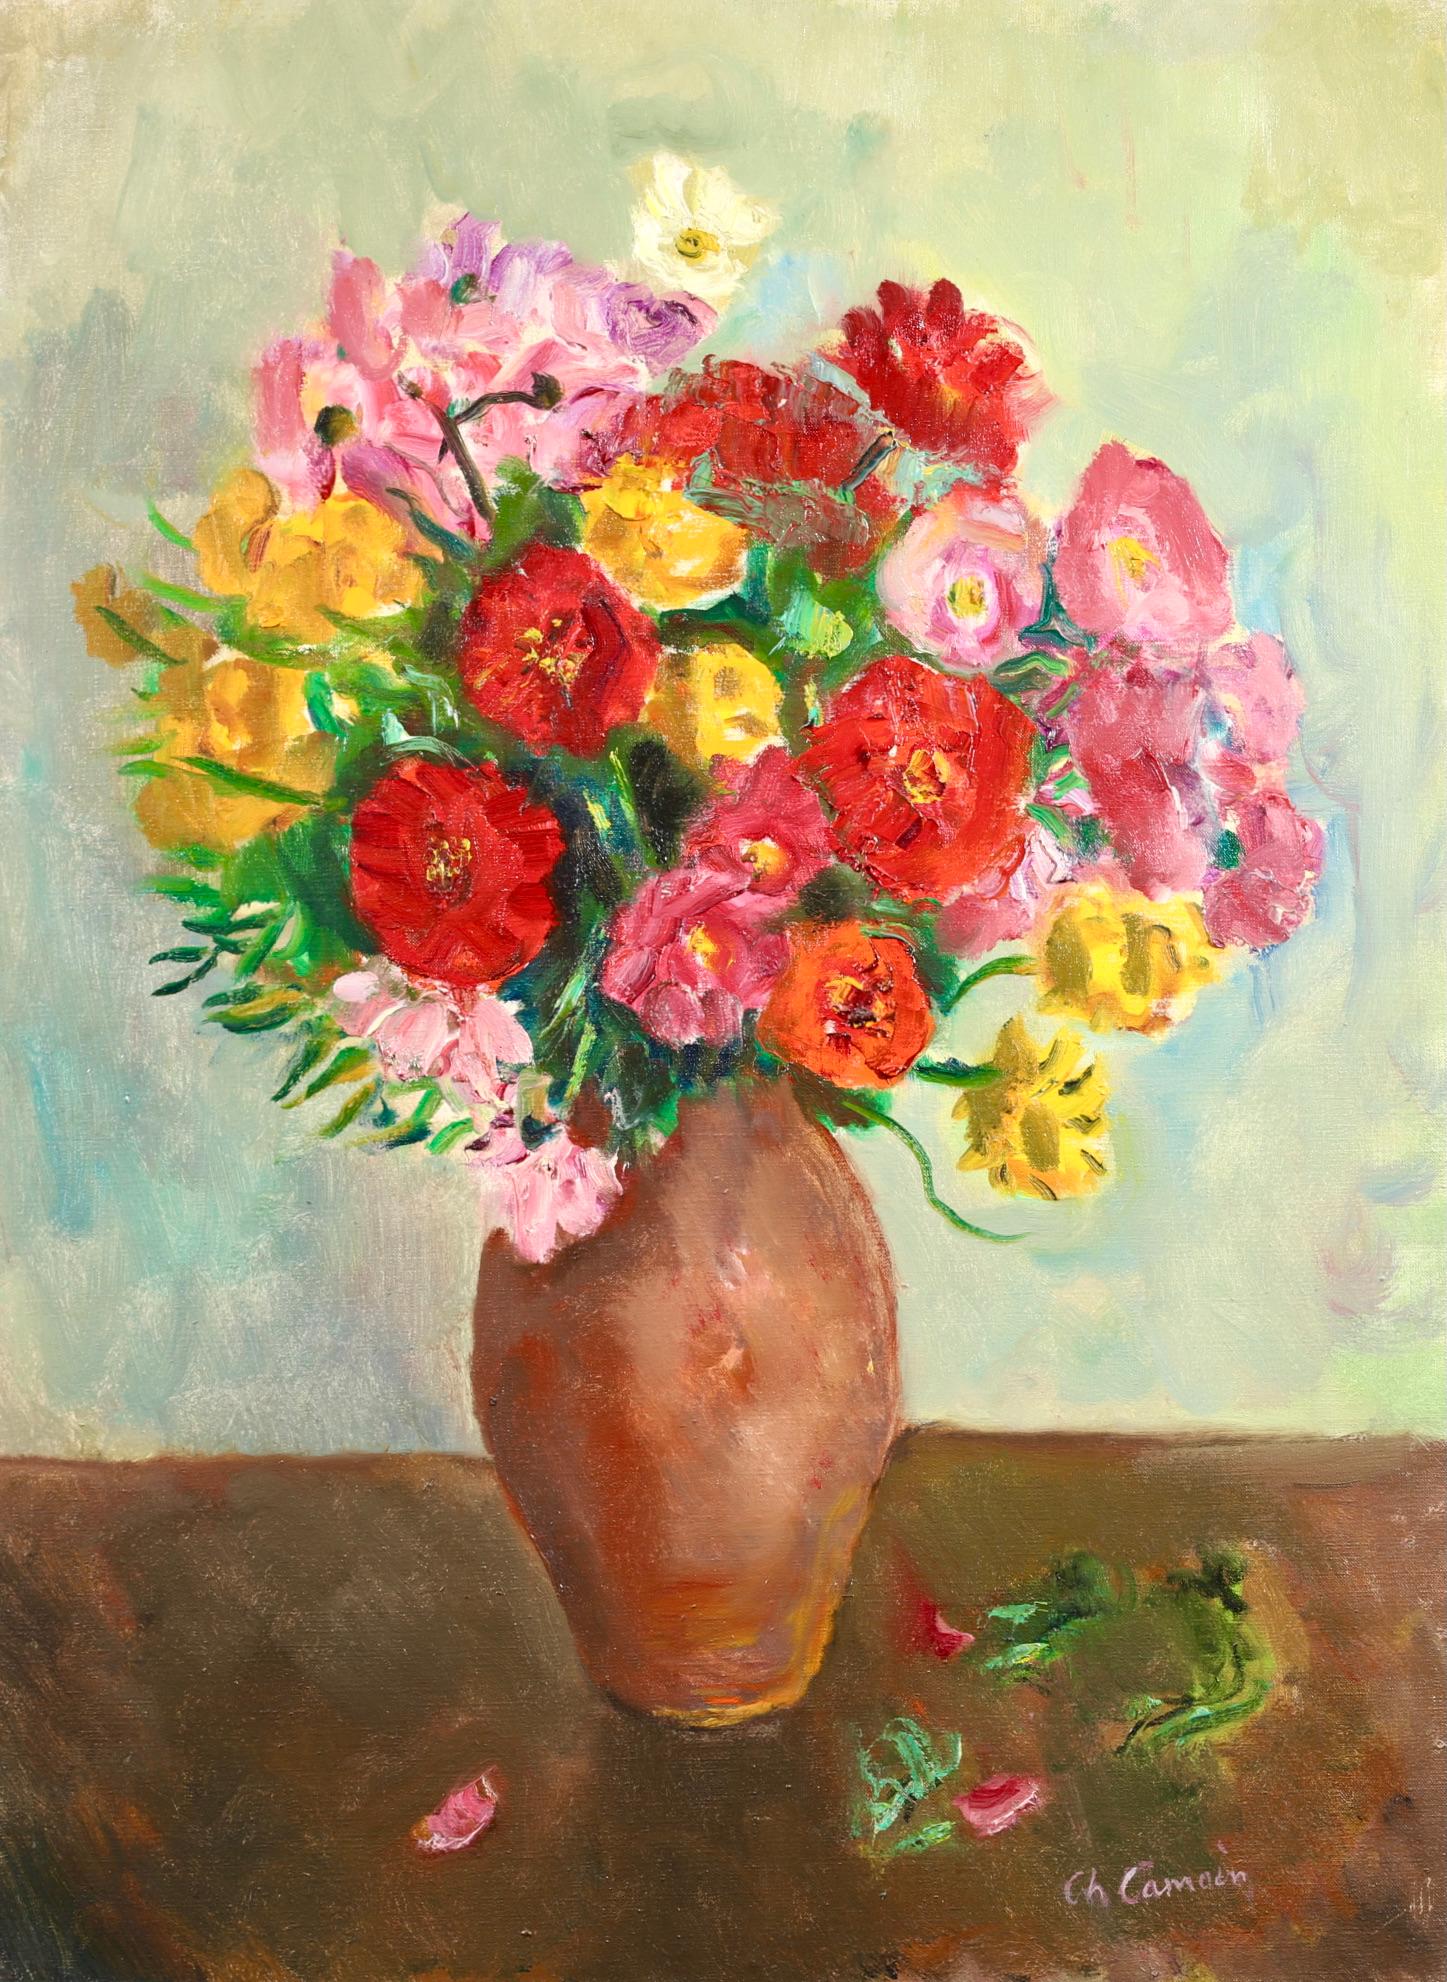 Signed still life oil on canvas by French expressionist and fauvist painter Charles Camoin. The work depicts a bright bouquet of flowers in reds, yellows, blues and pinks in a stoneware vase. 

Signature:
Signed lower right

Dimensions:
Framed: